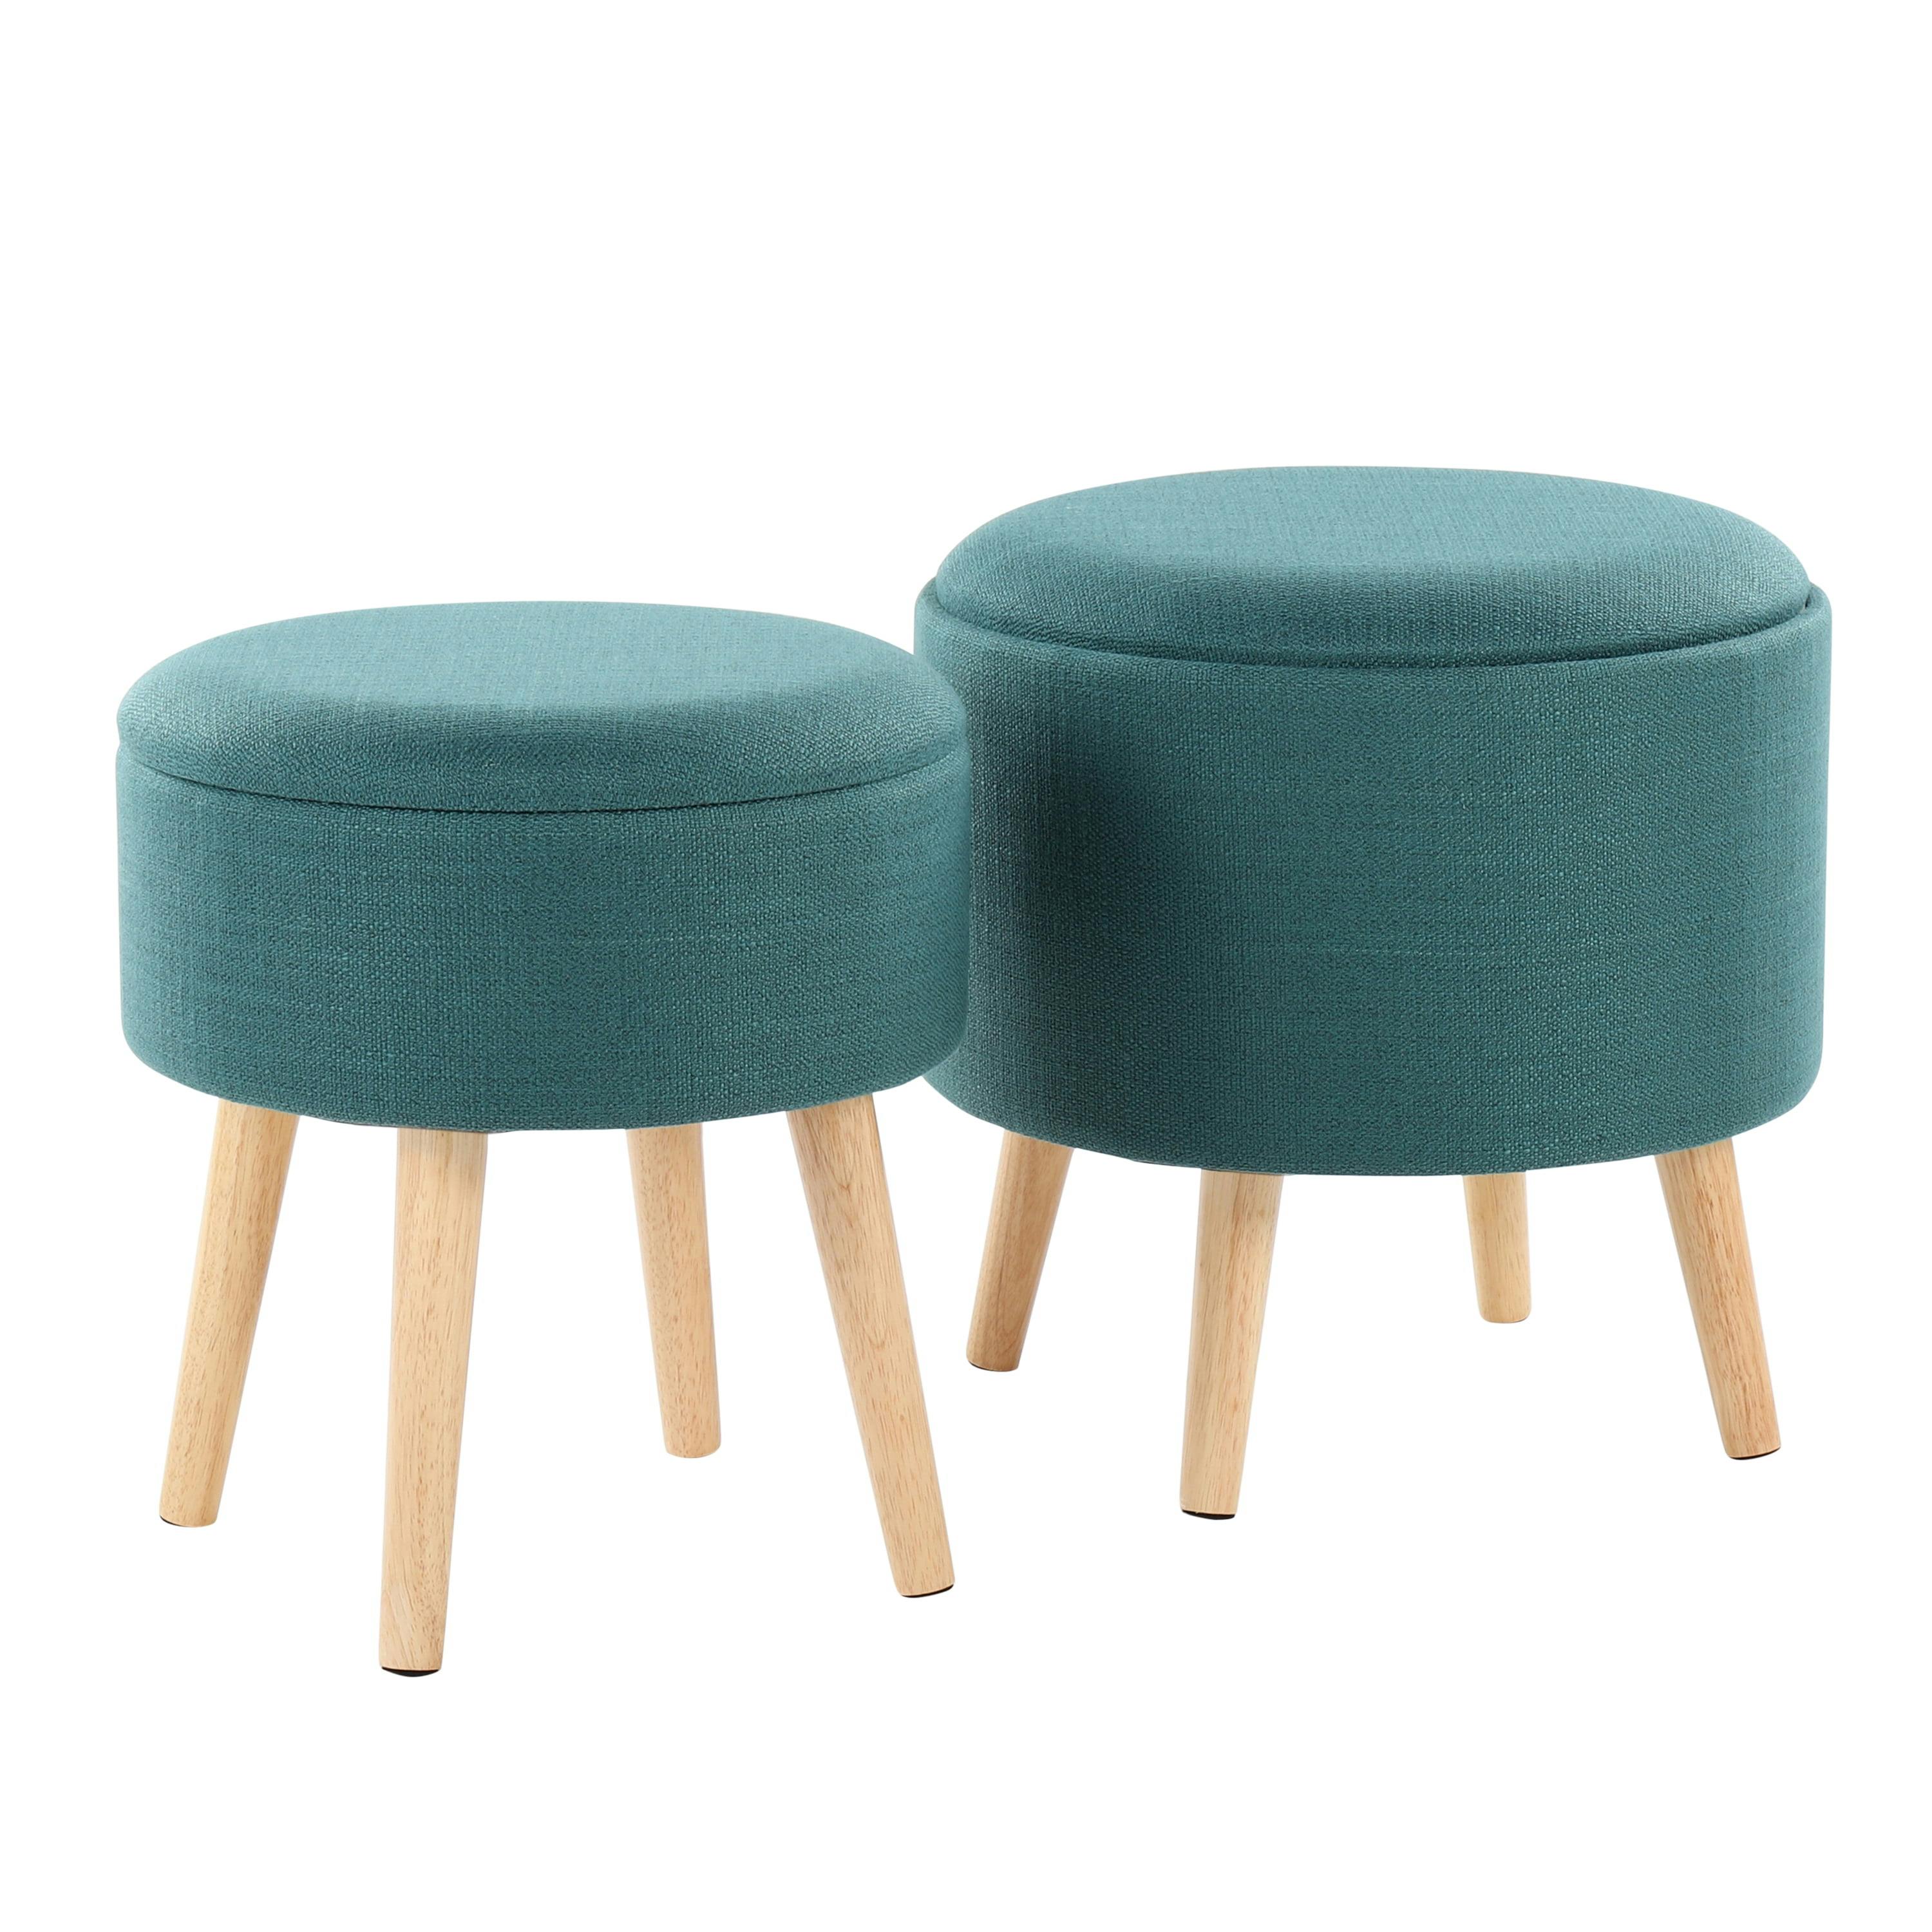 Teal Fabric Ottoman with Natural Wood Tray and Matching Stool